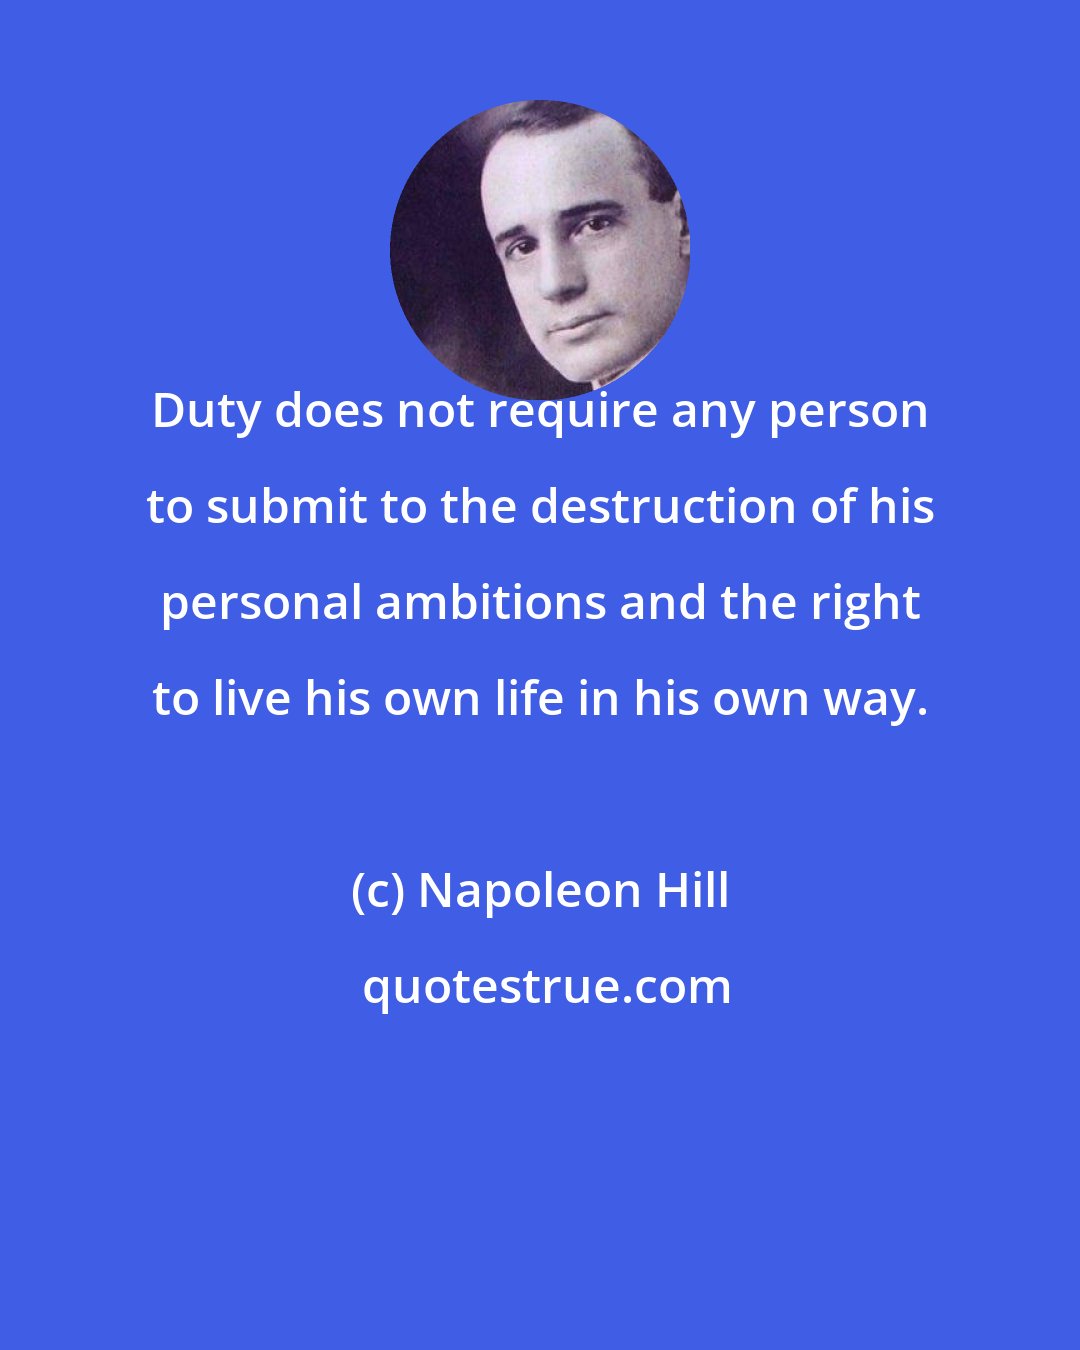 Napoleon Hill: Duty does not require any person to submit to the destruction of his personal ambitions and the right to live his own life in his own way.